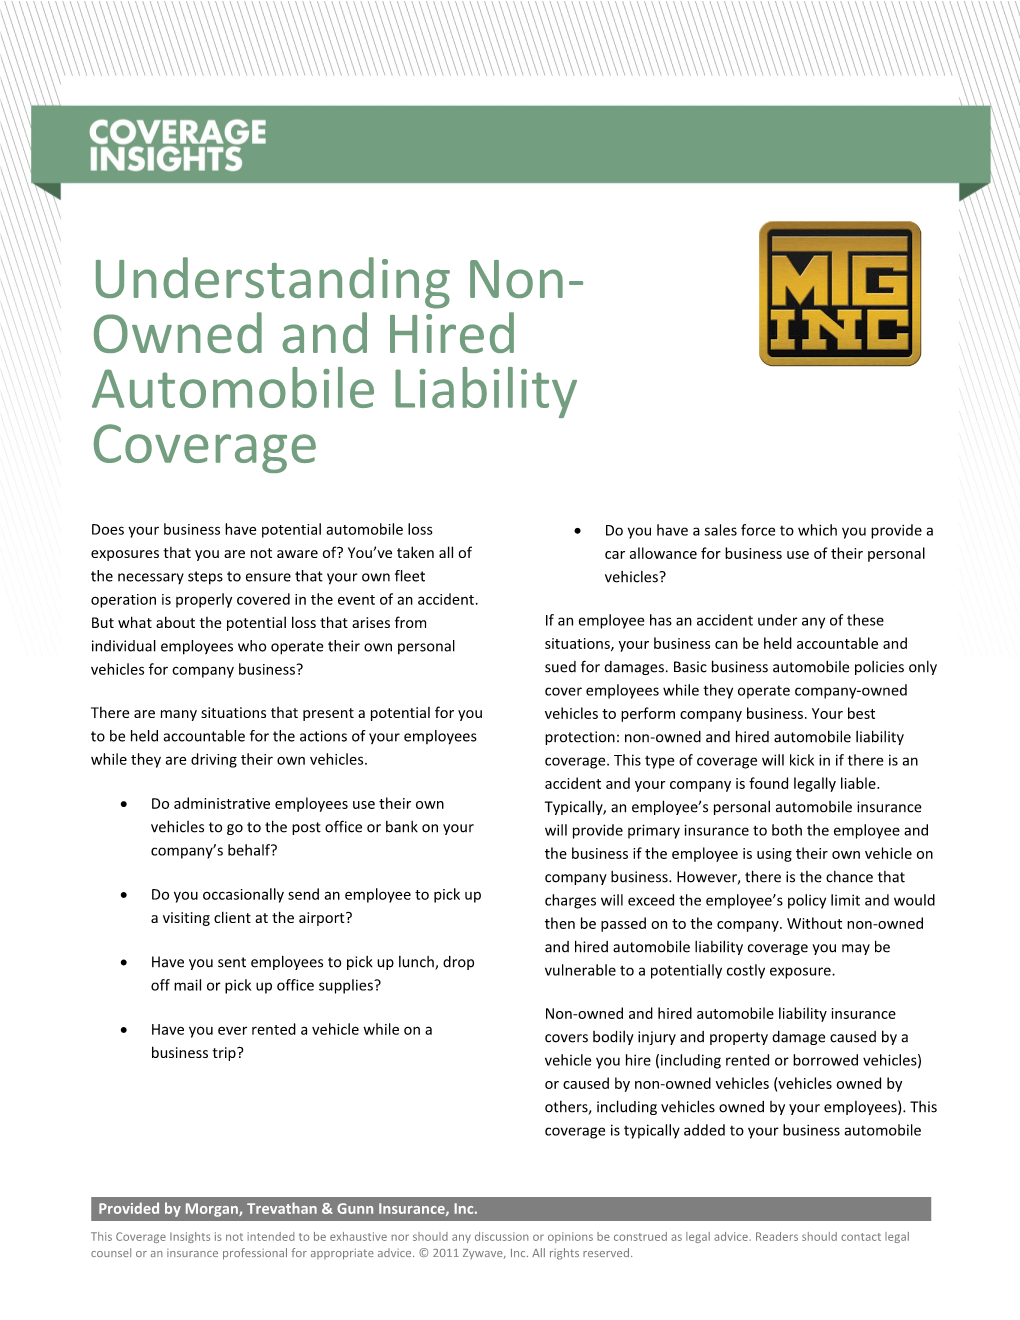 Understanding Non-Owned and Hired Automobile Liability Coverage